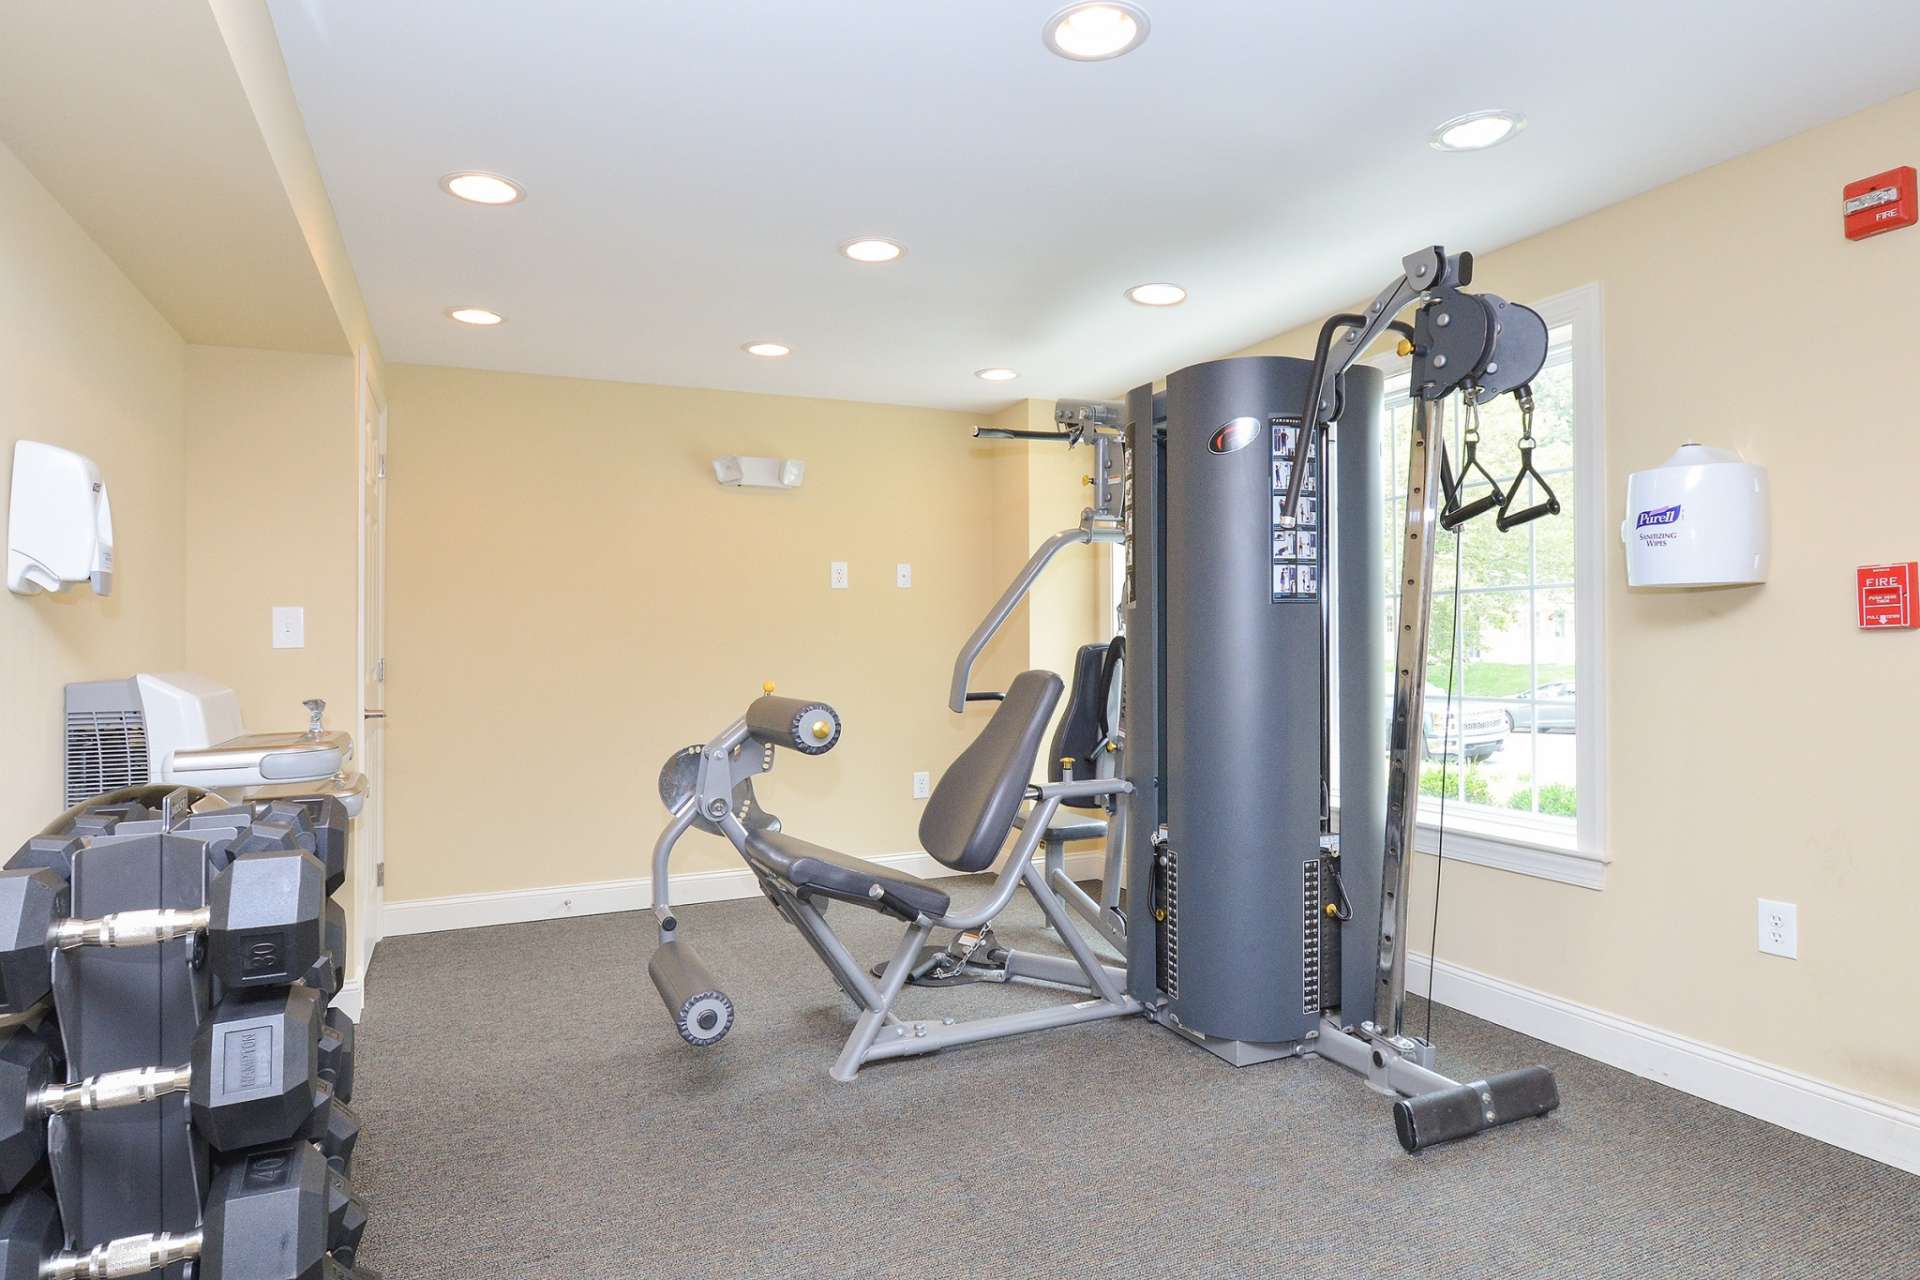 Various workout equipment in an indoor gym at Greenville on 141 Apartments and Townhomes.